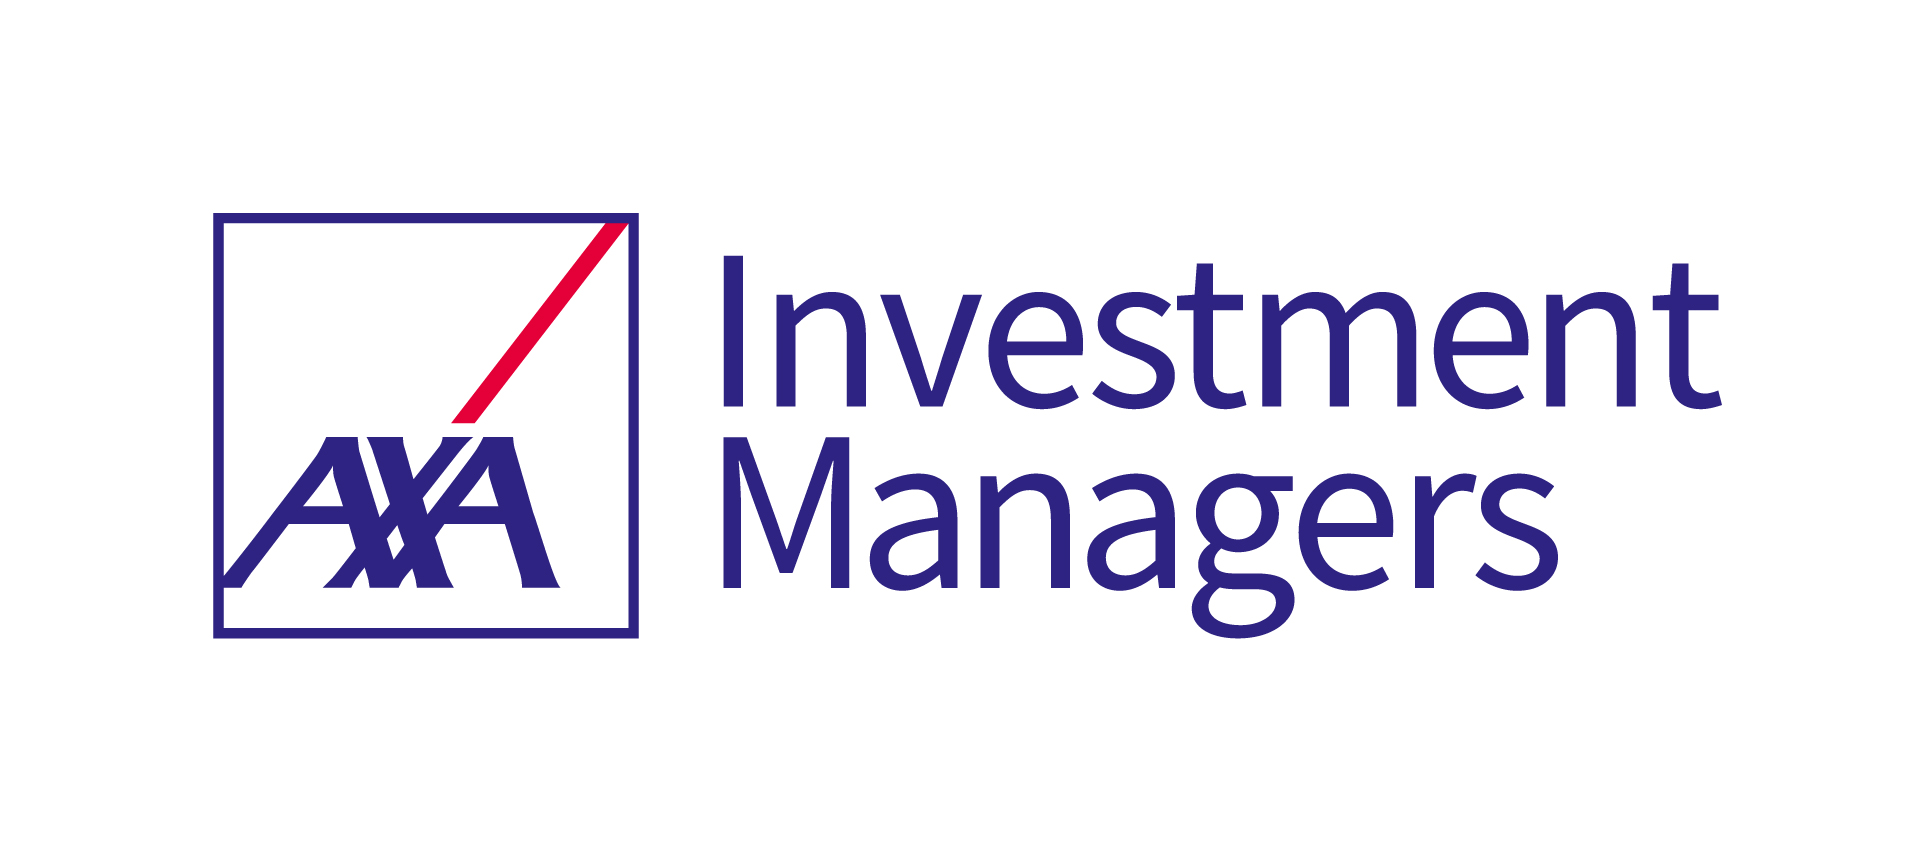 logo-AXA INVESTMENT MANAGERS